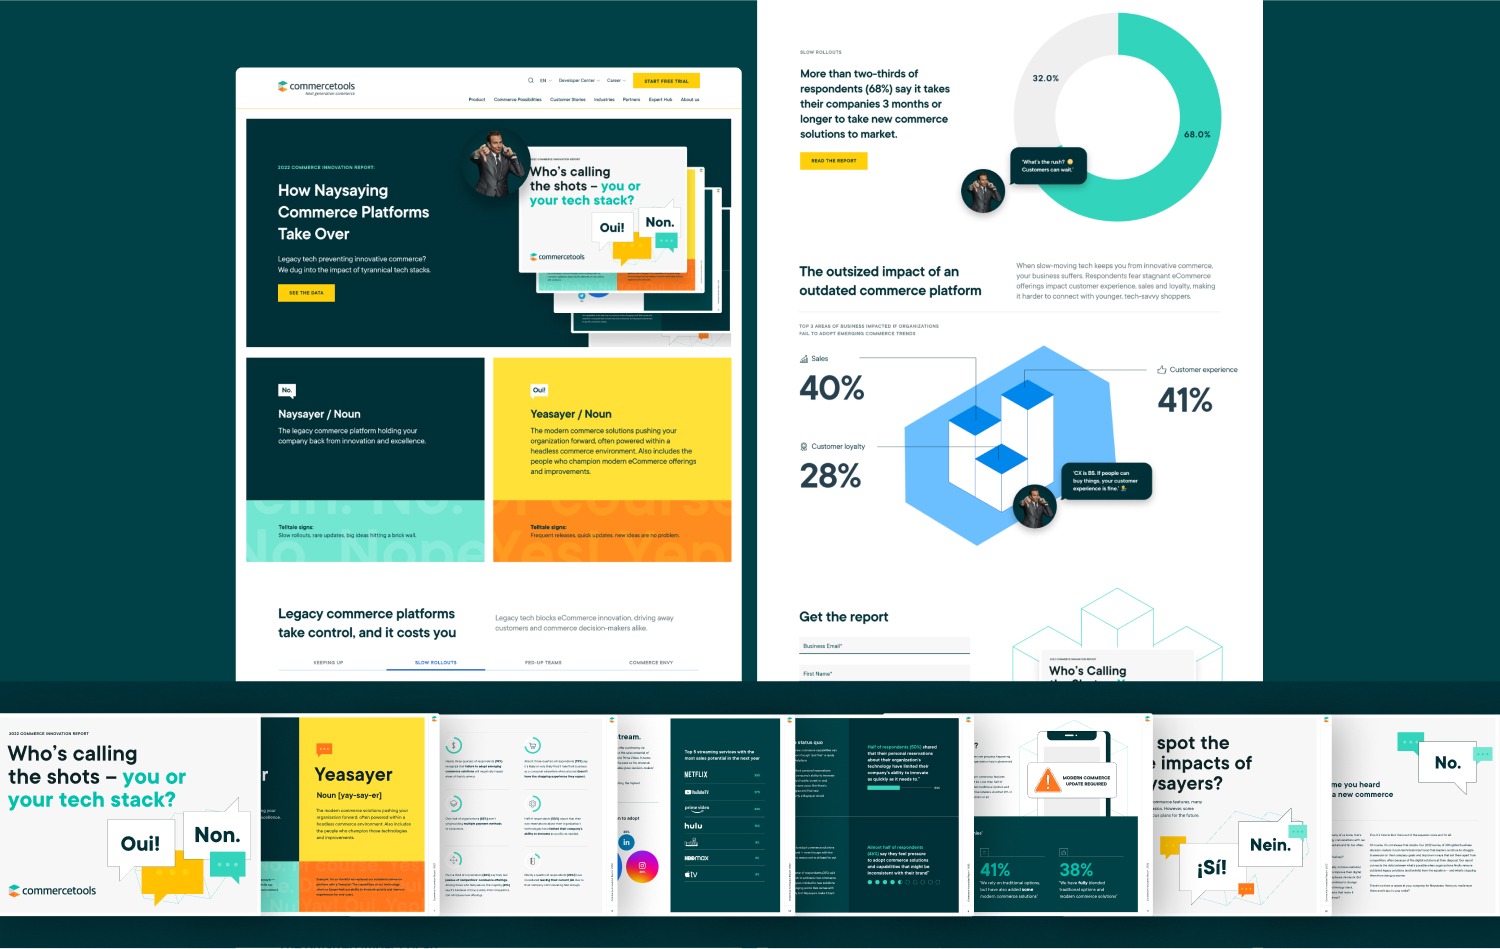 Mockup of pages from commercetools' Naysayer research report